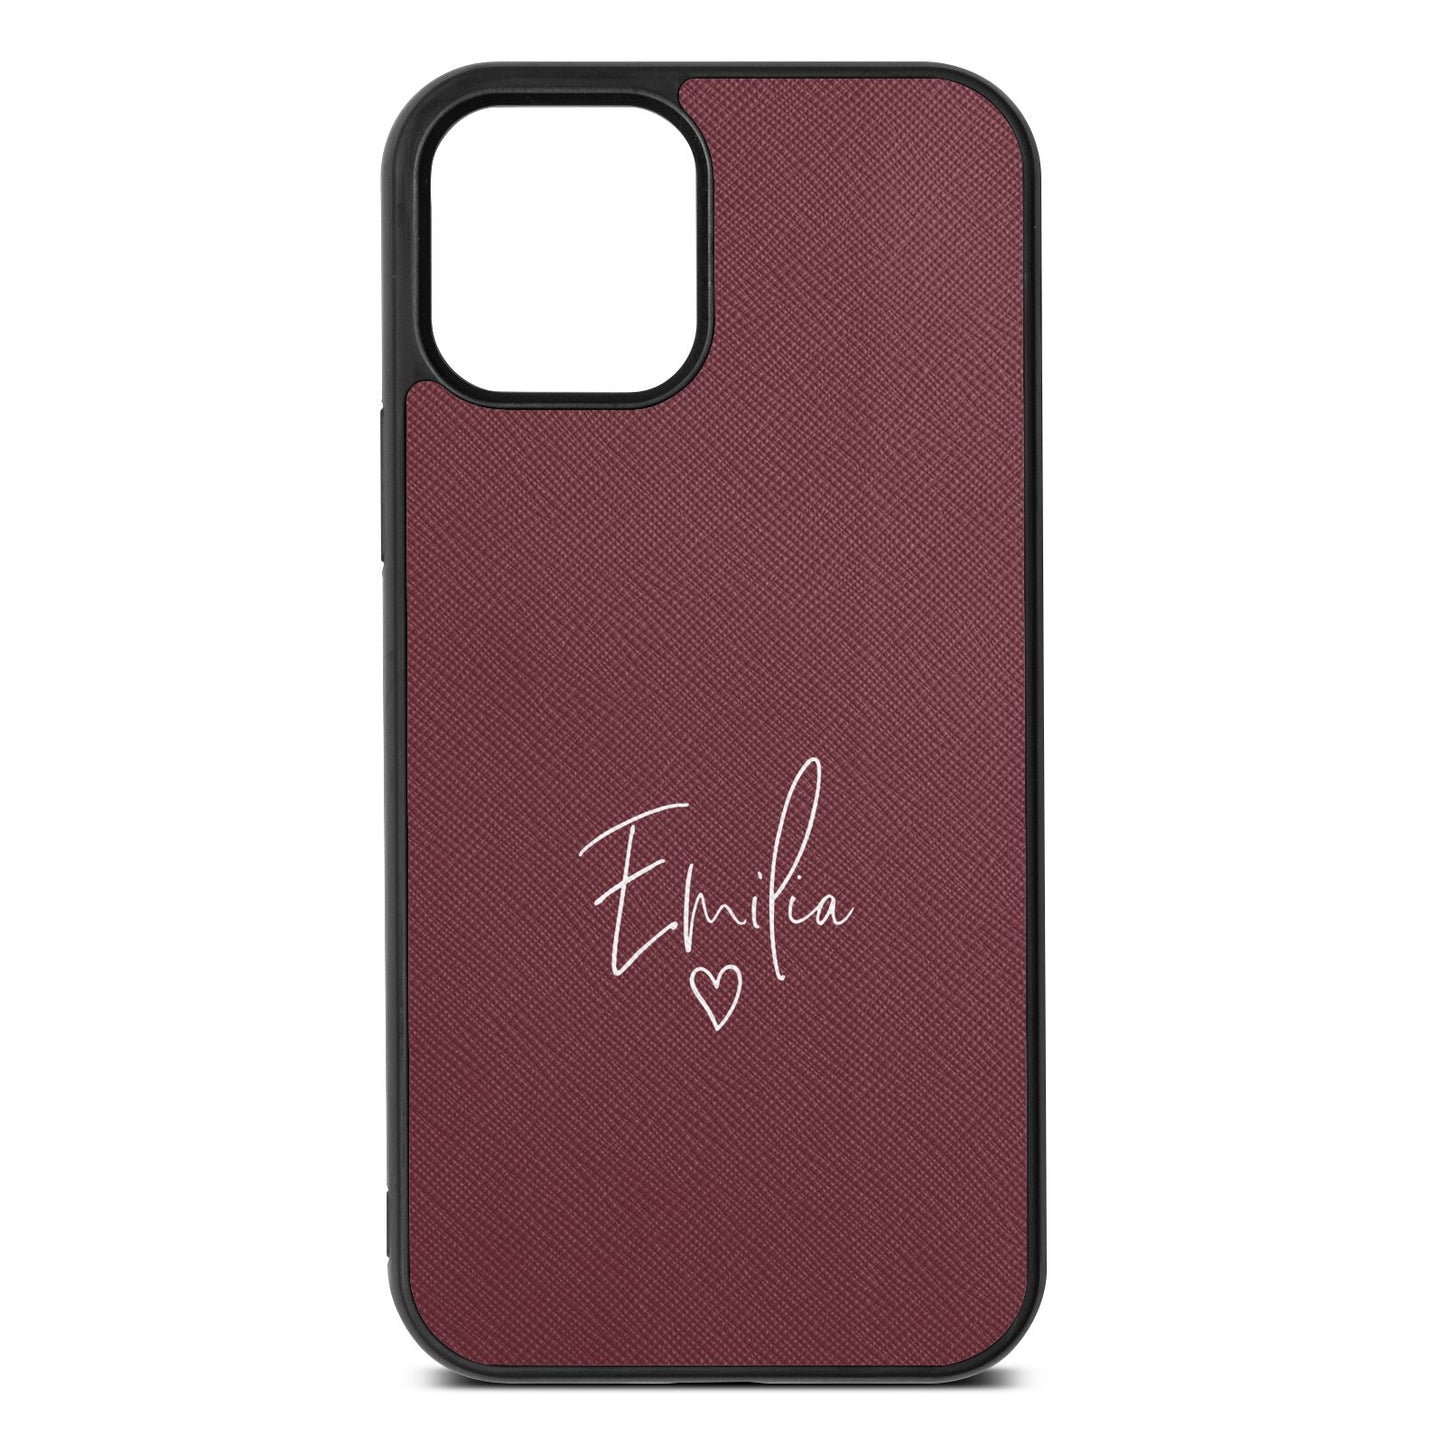 White Handwritten Name Transparent Rose Brown Saffiano Leather iPhone 12 Case